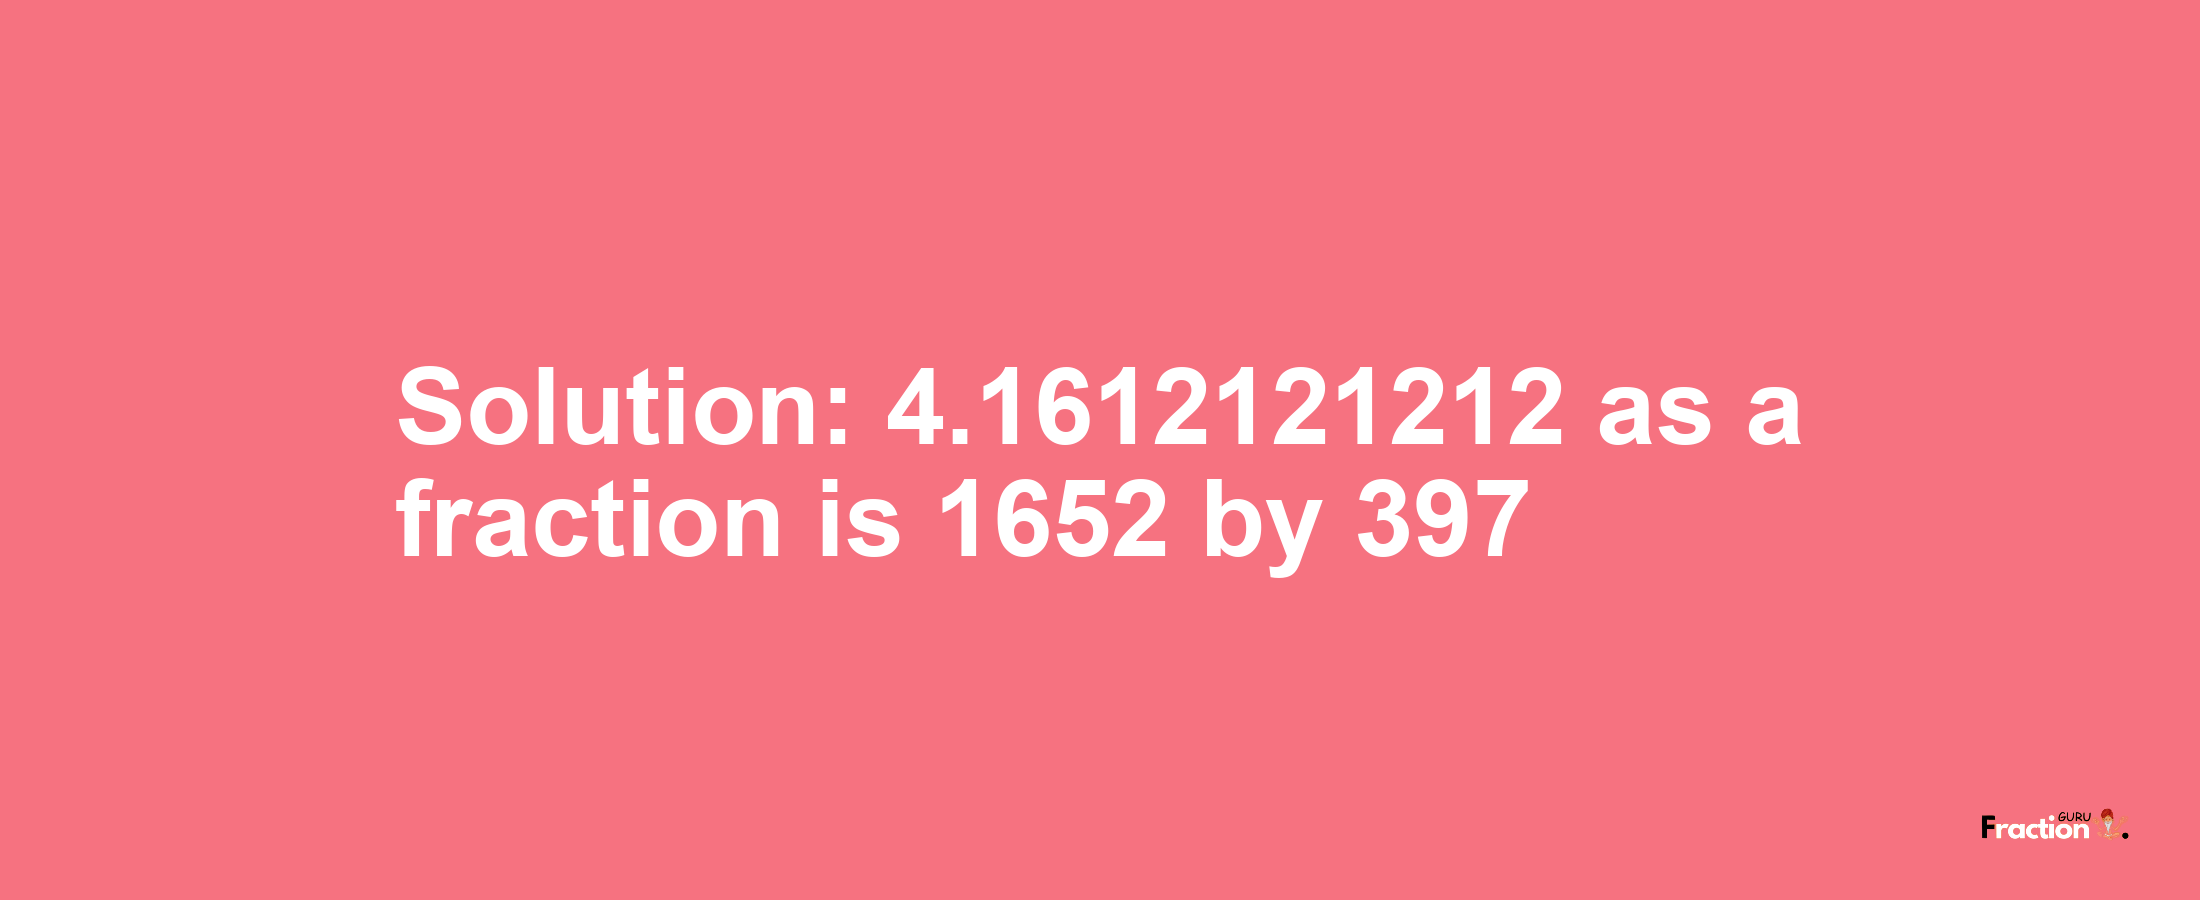 Solution:4.1612121212 as a fraction is 1652/397